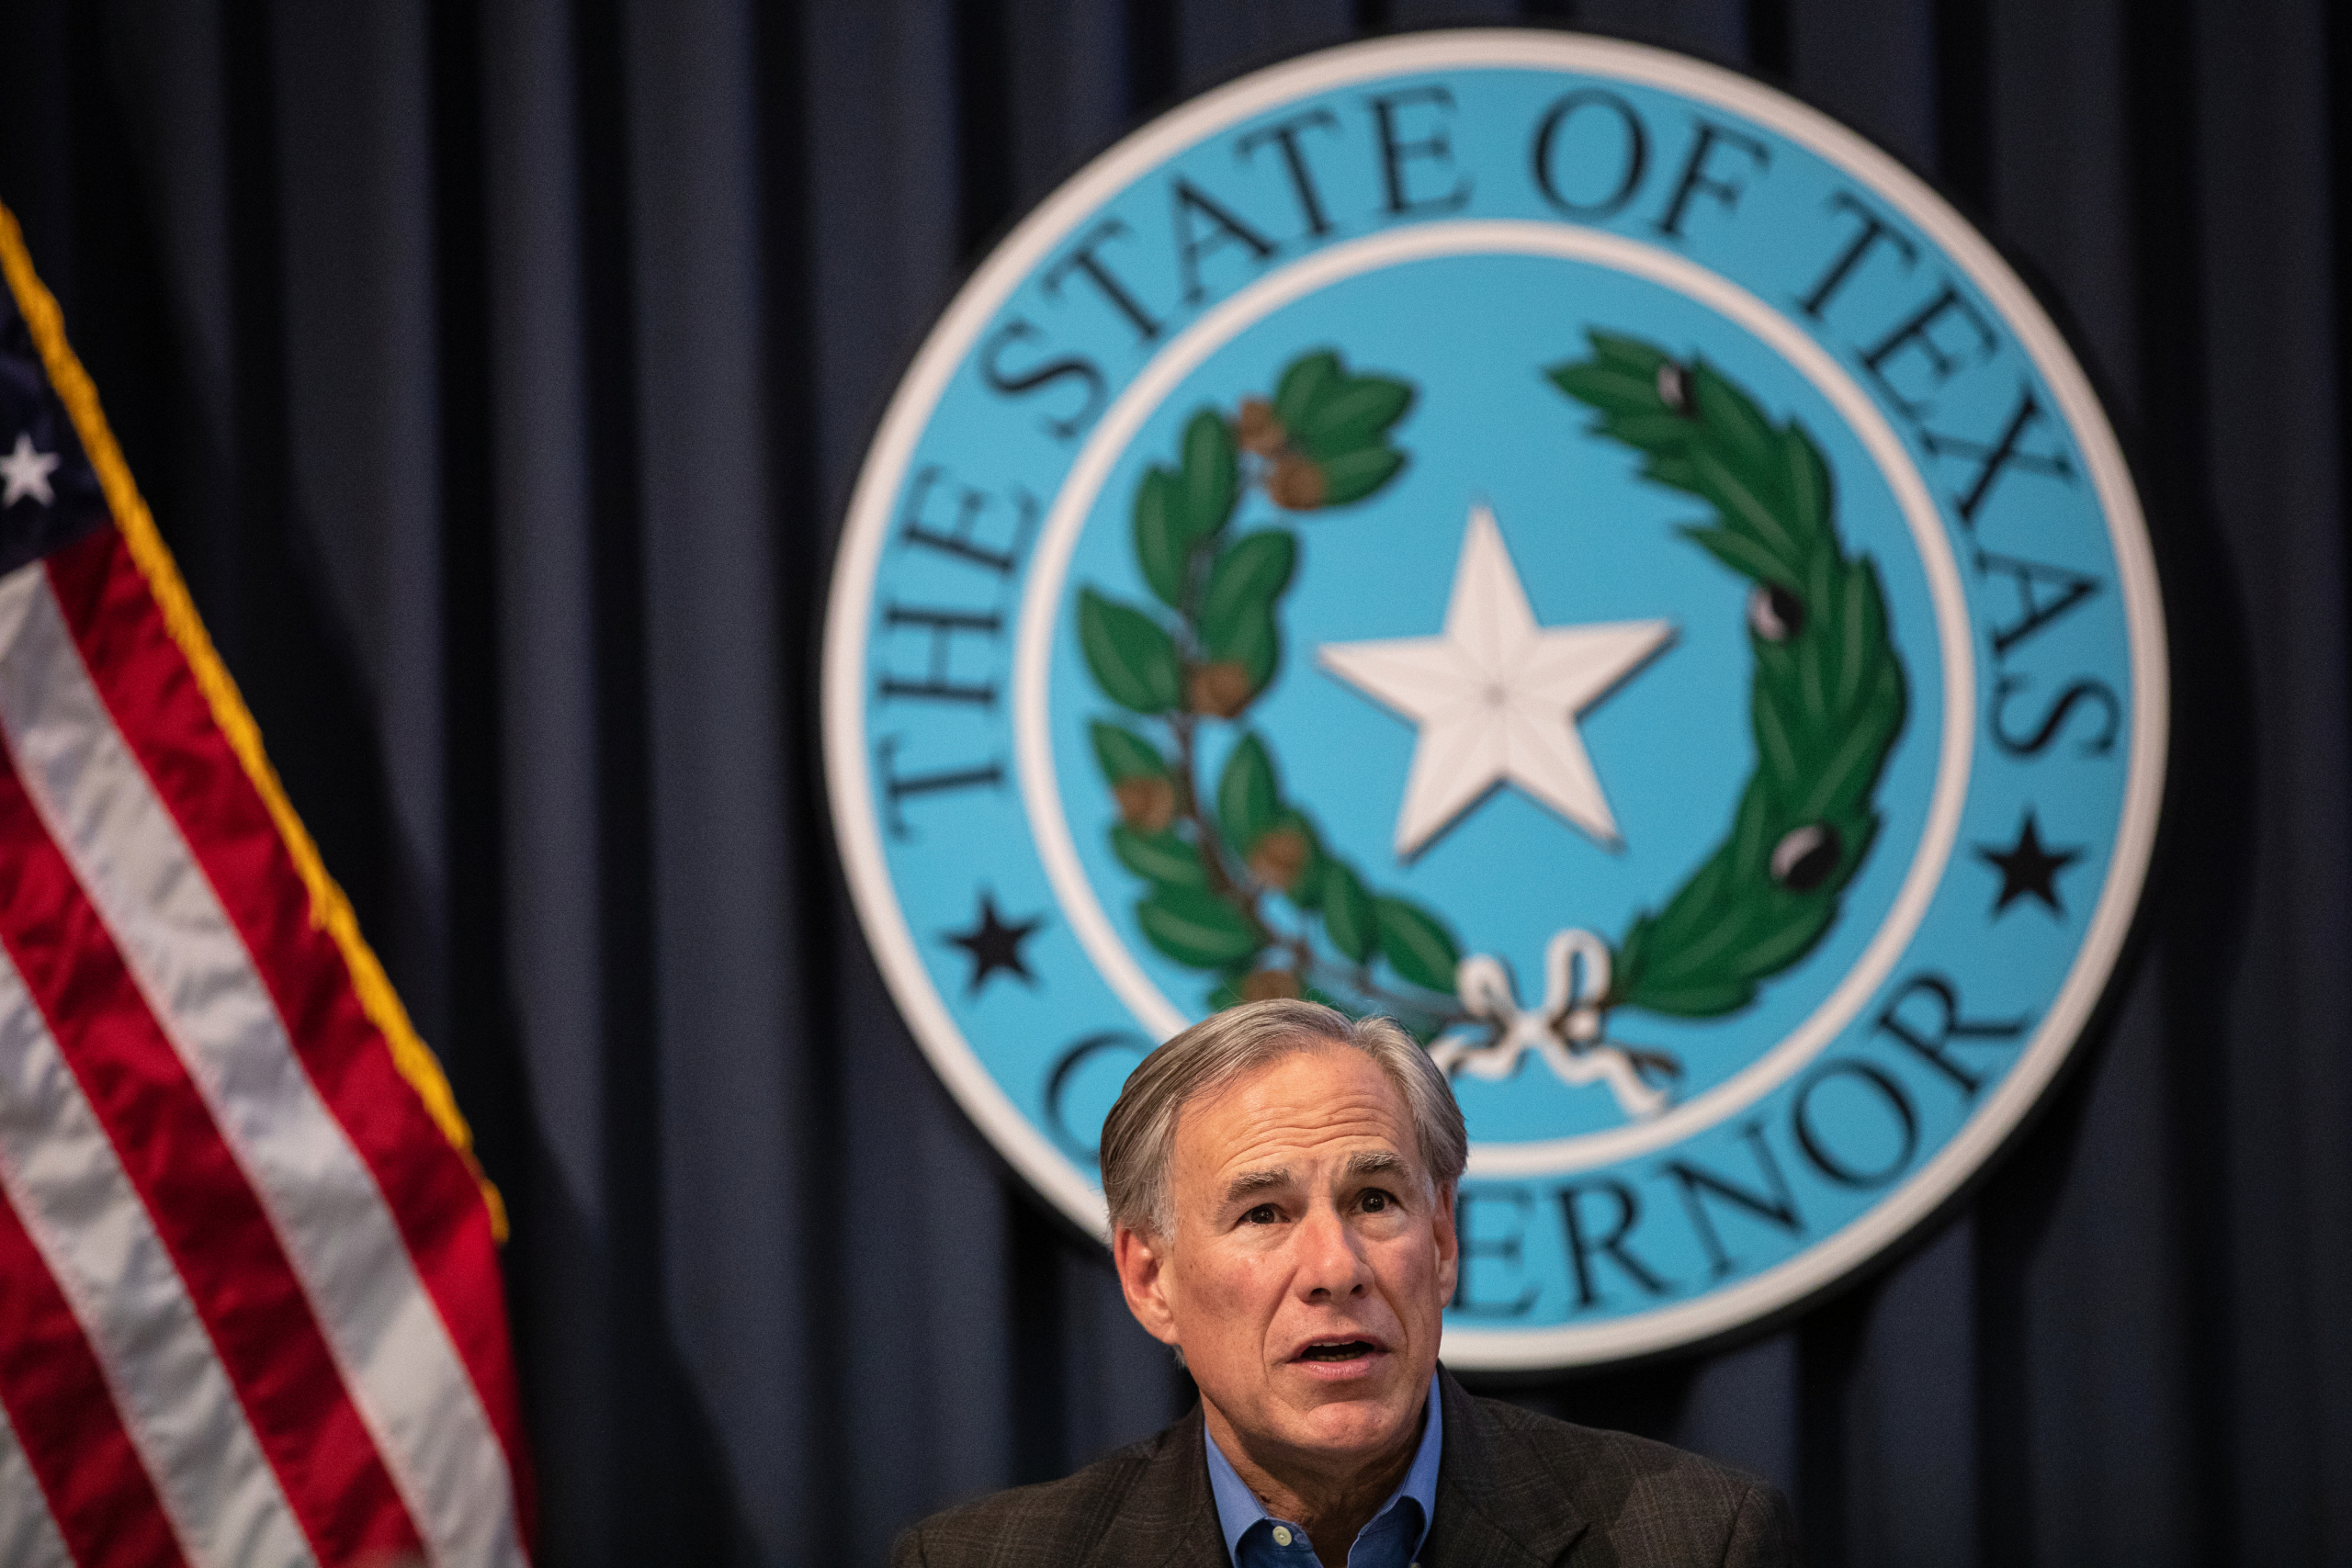 Texas State Legislature Continues Work On Bills During Special Session